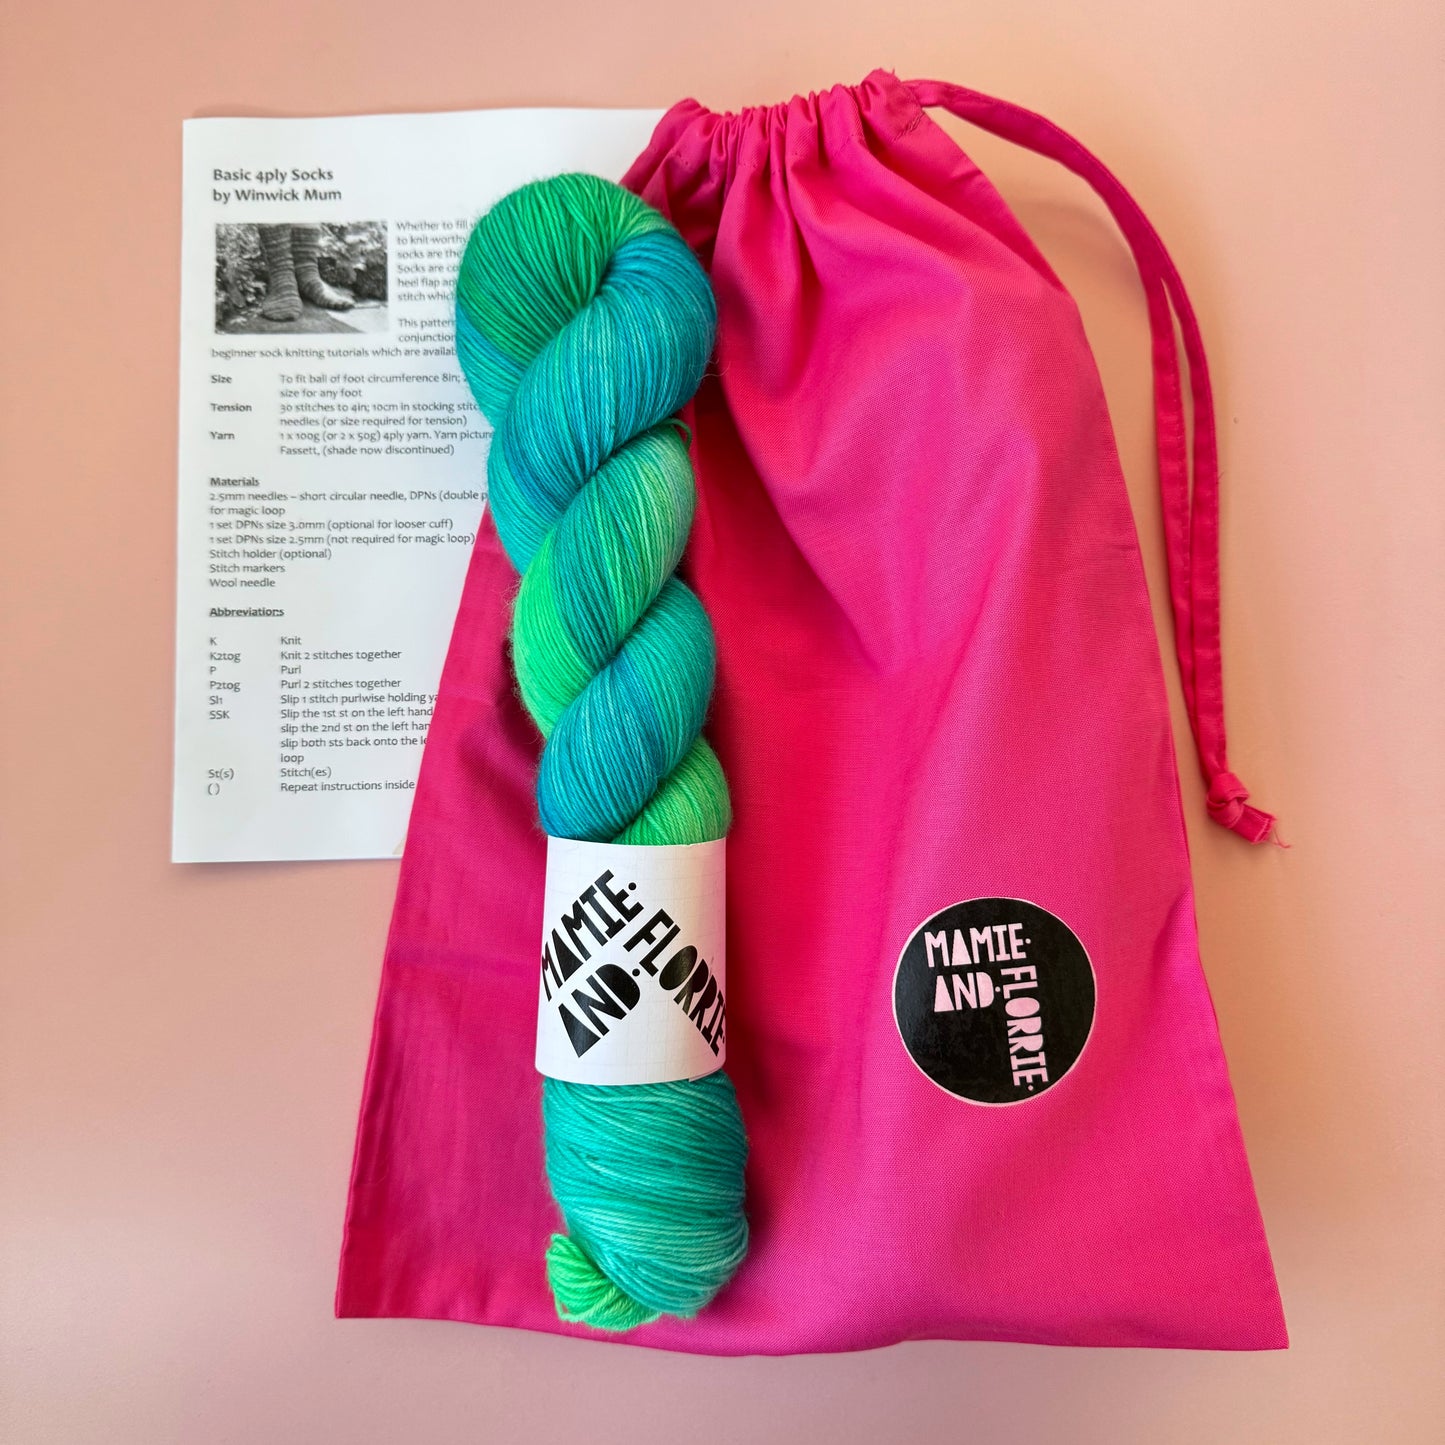 The Perfect Beginners Sock Knitting Kit - Beach Huts in the Caribbean